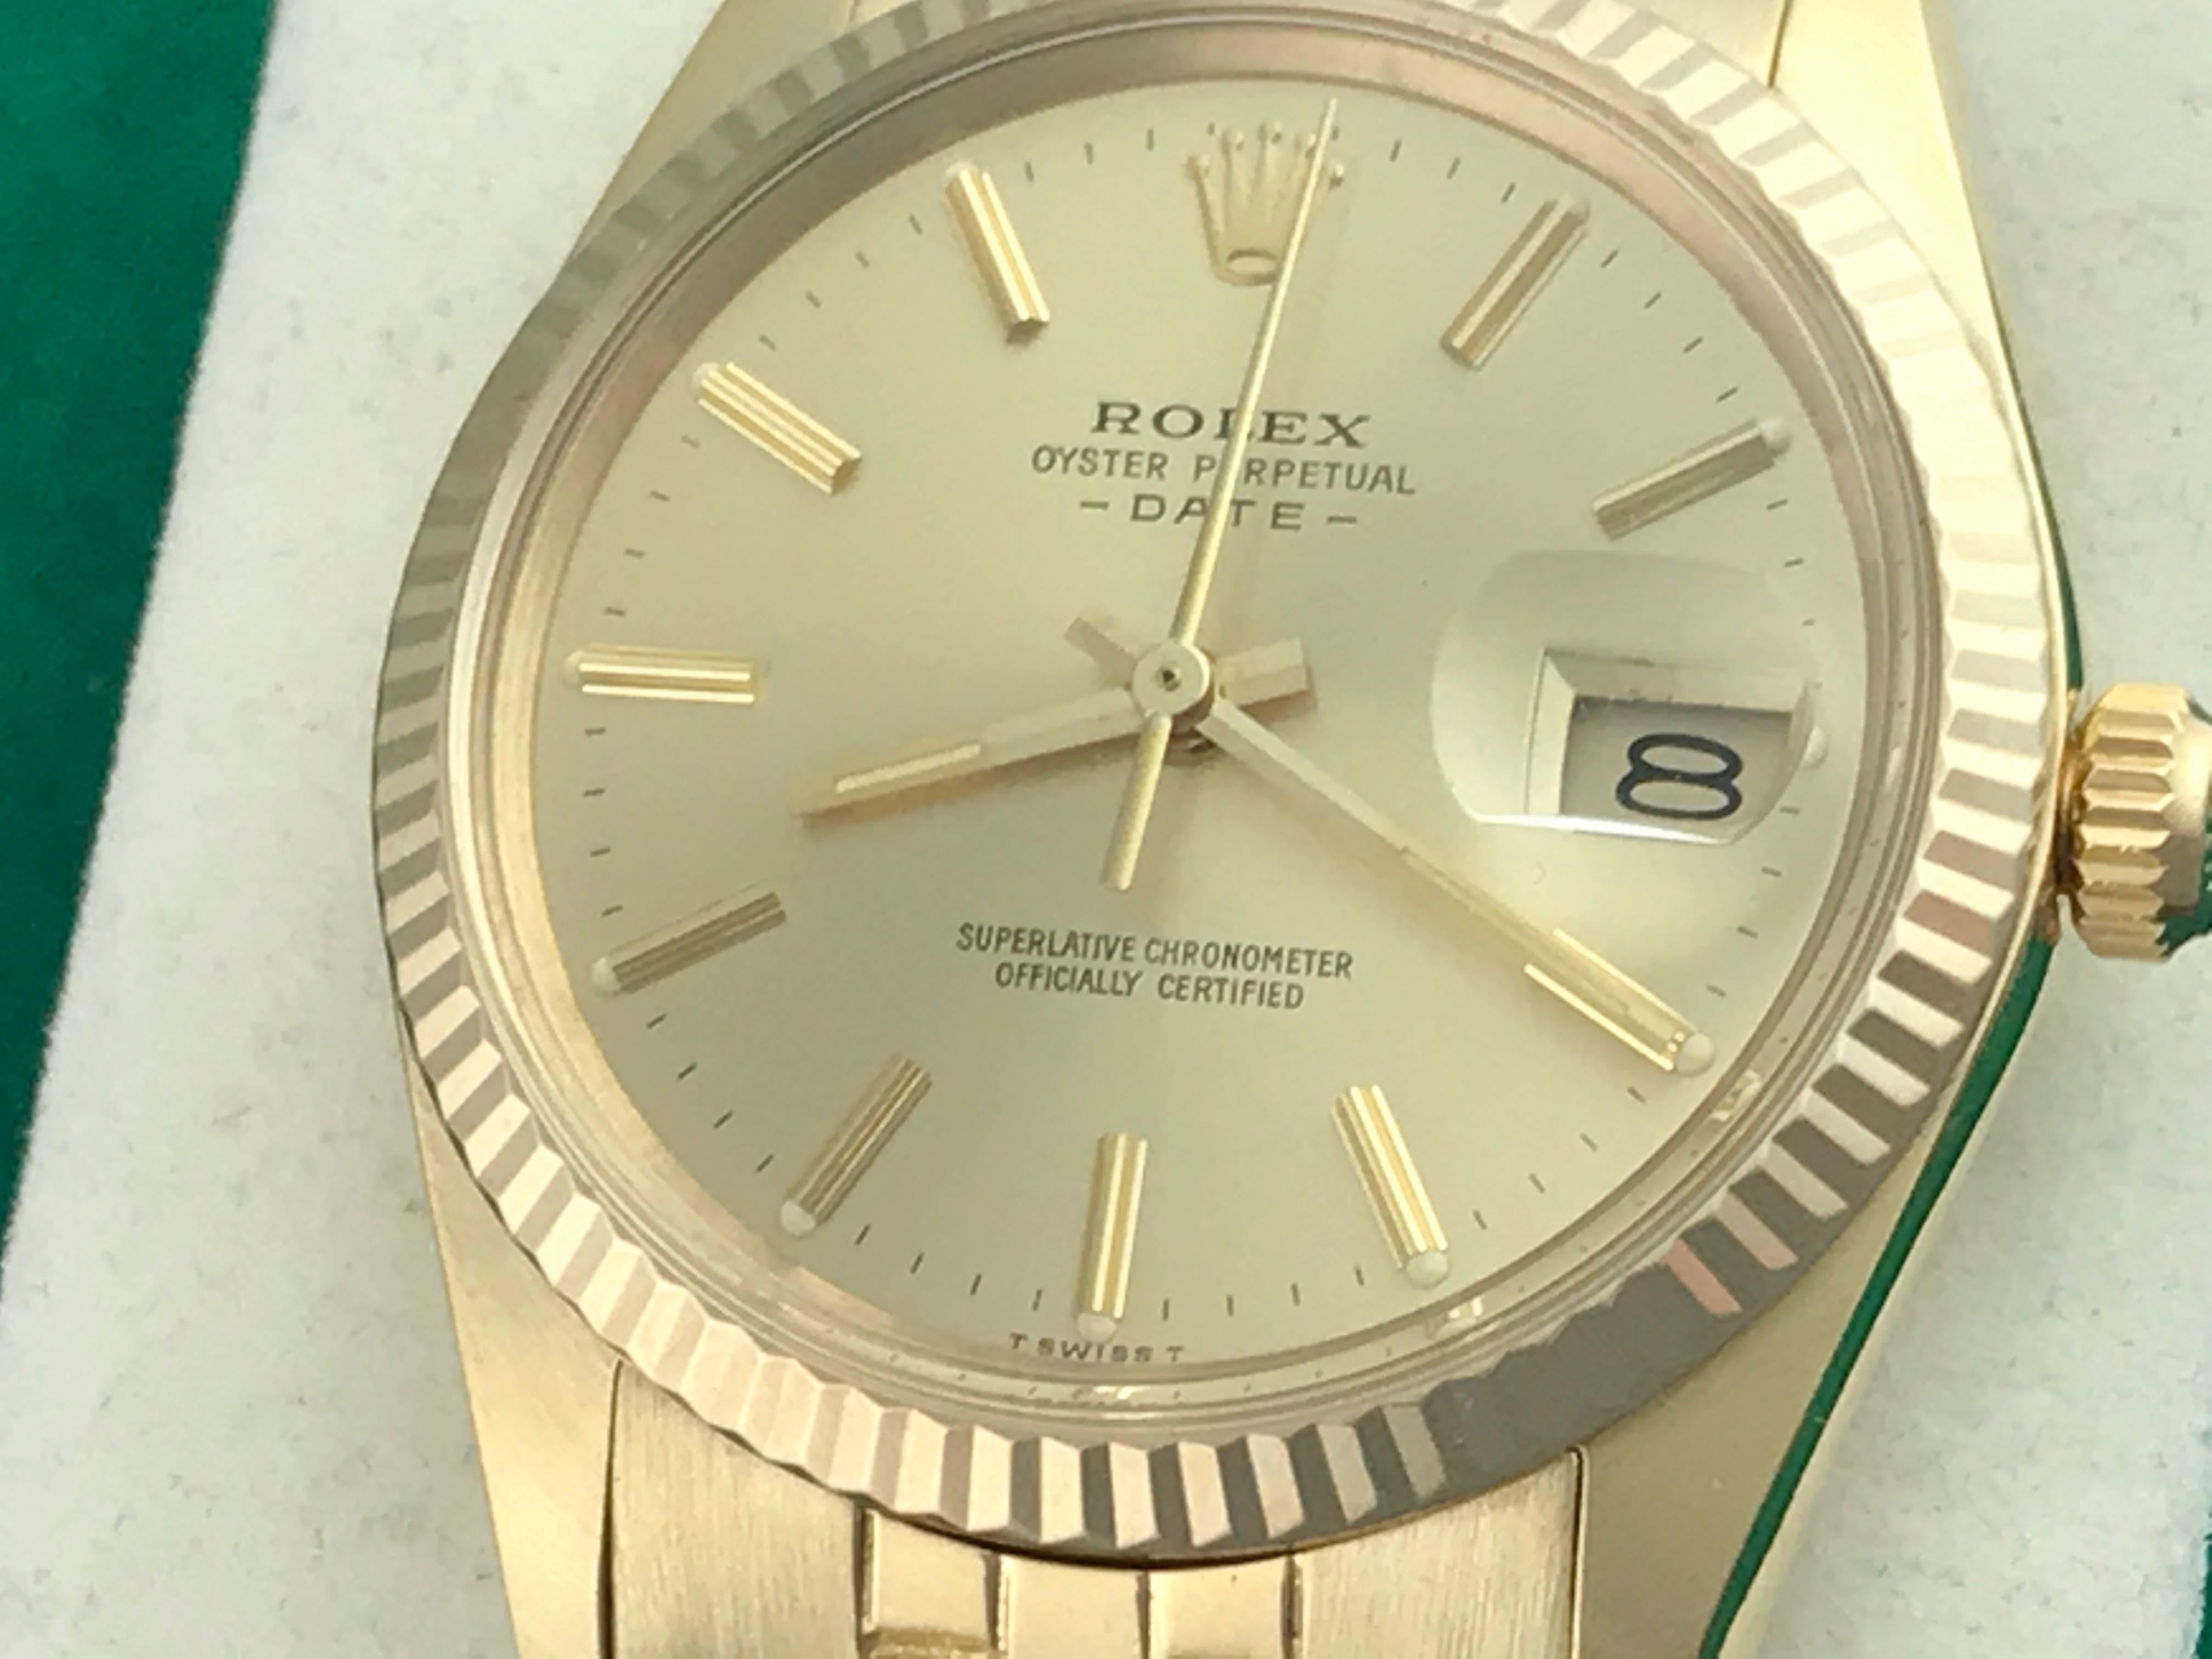 The Rolex Date Model 15037 14k yellow gold pre-owned men's automatic wrist watch. Featuring a champagne dial with yellow gold hour markers and 14k Yellow Gold case. Measures 34mm. Comes with a 14k yellow gold jubilee bracelet.  Box, instruction